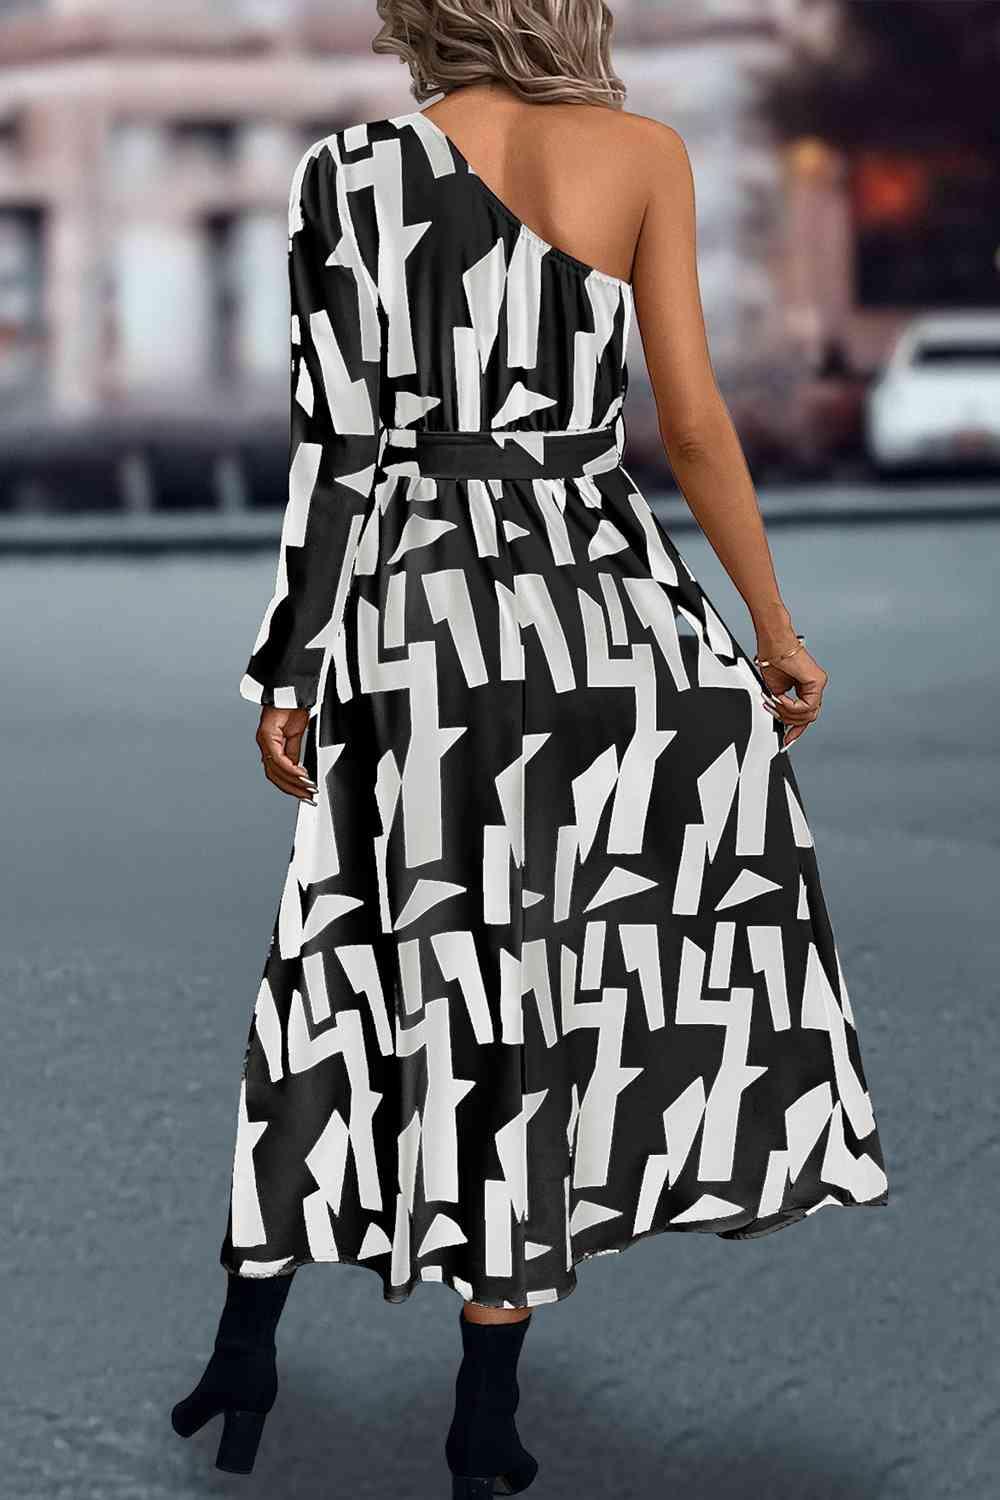 a woman in a black and white dress